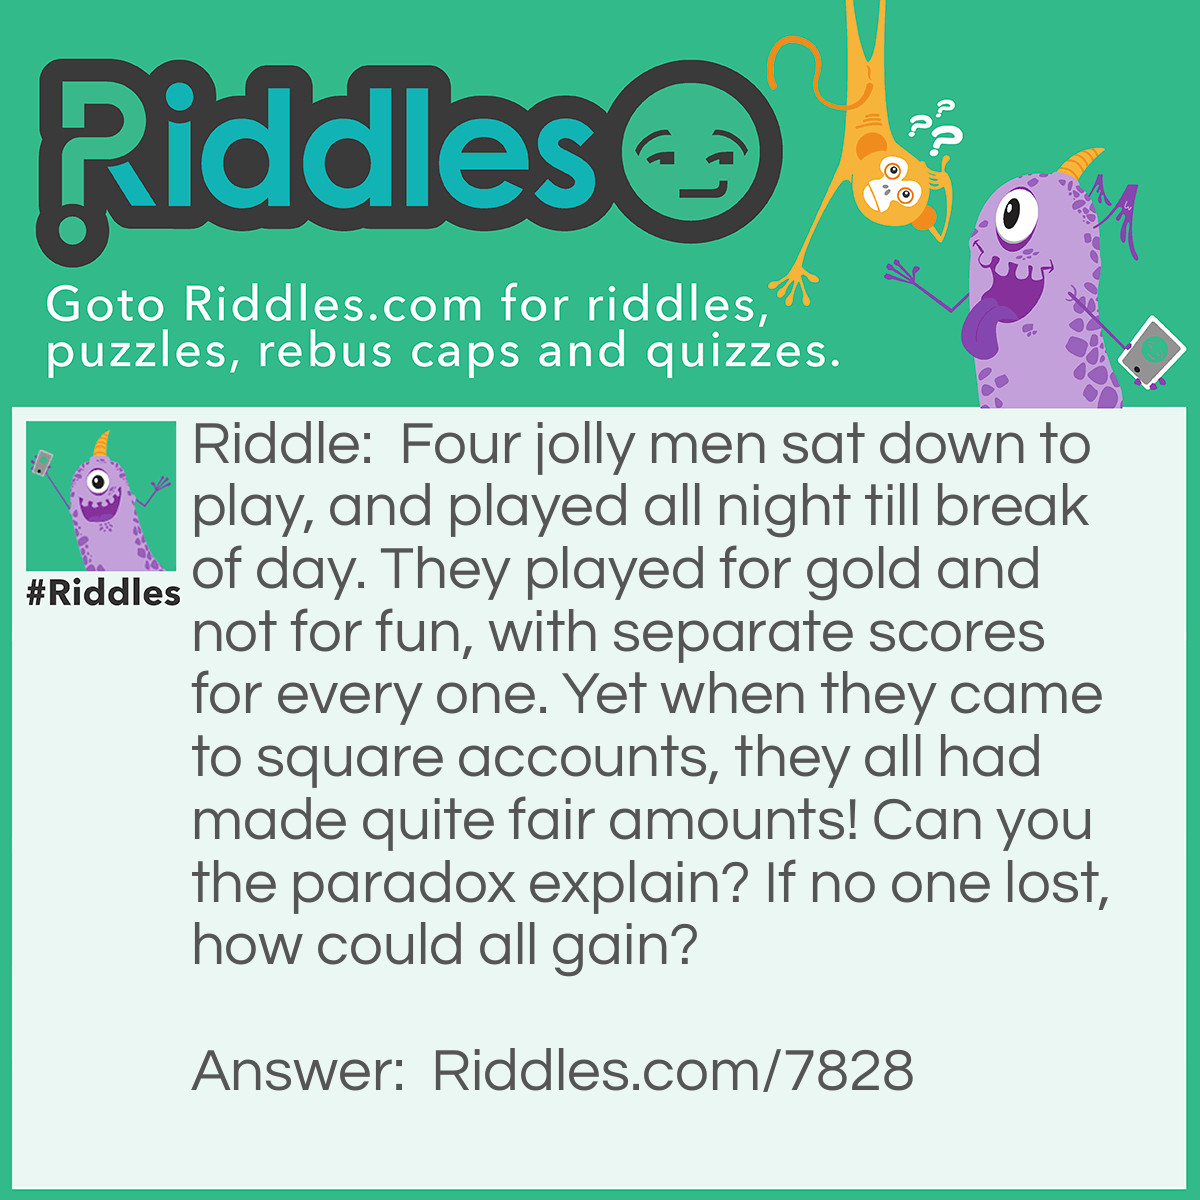 Riddle: Four jolly men sat down to play, and played all night till break of day. They played for gold and not for fun, with separate scores for every one. Yet when they came to square accounts, they all had made quite fair amounts! Can you the paradox explain? If no one lost, how could all gain? Answer: They were musicians.